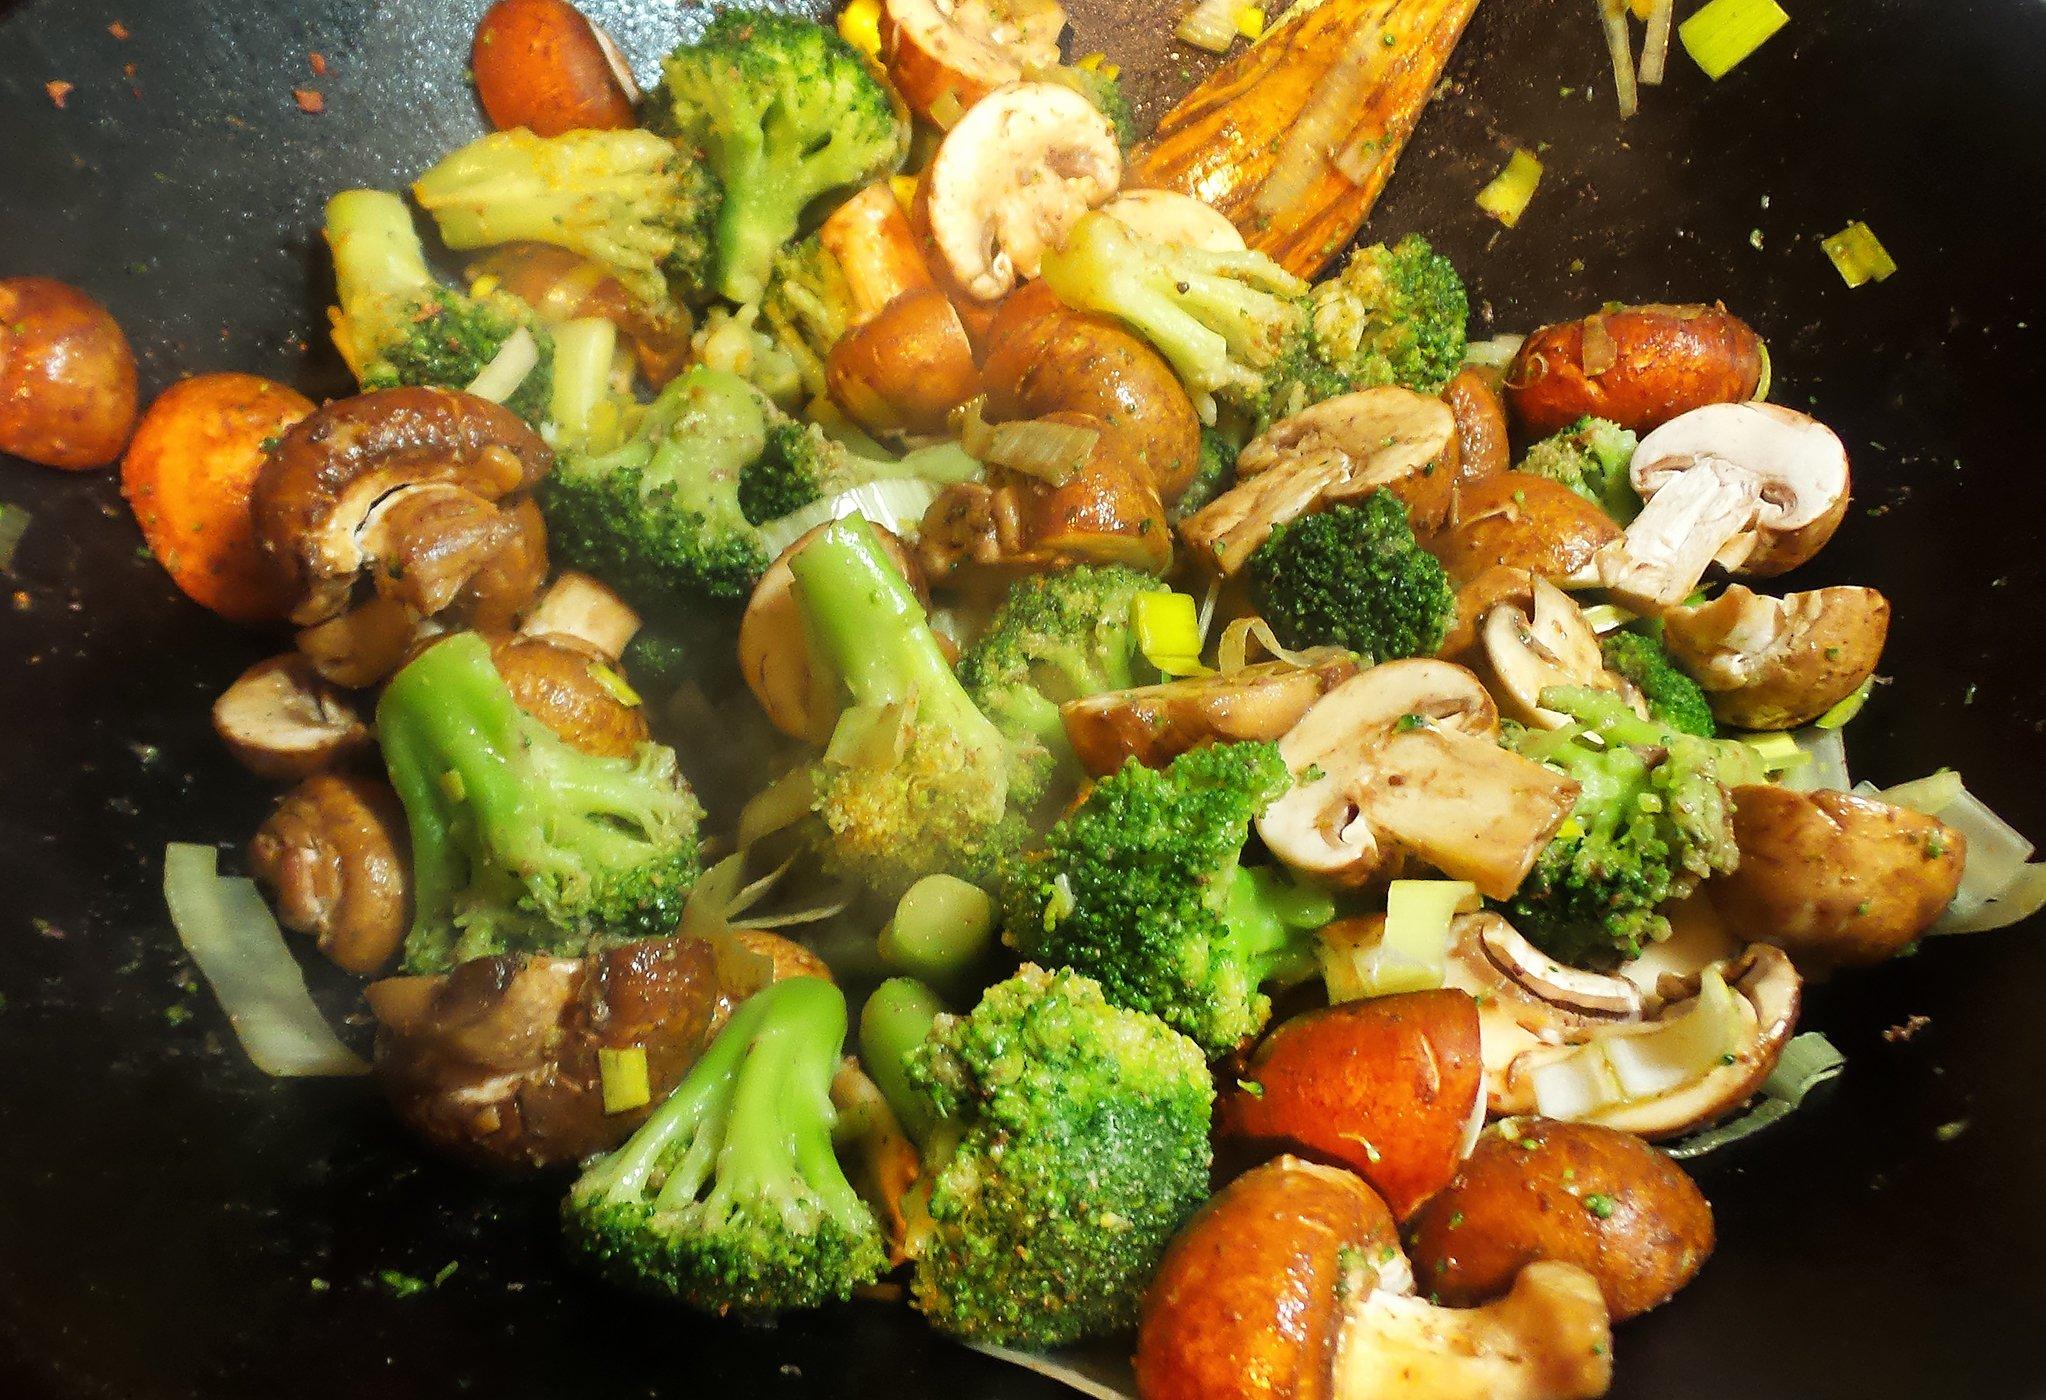 A quick stir fry for the vegetables and the dish is about complete.